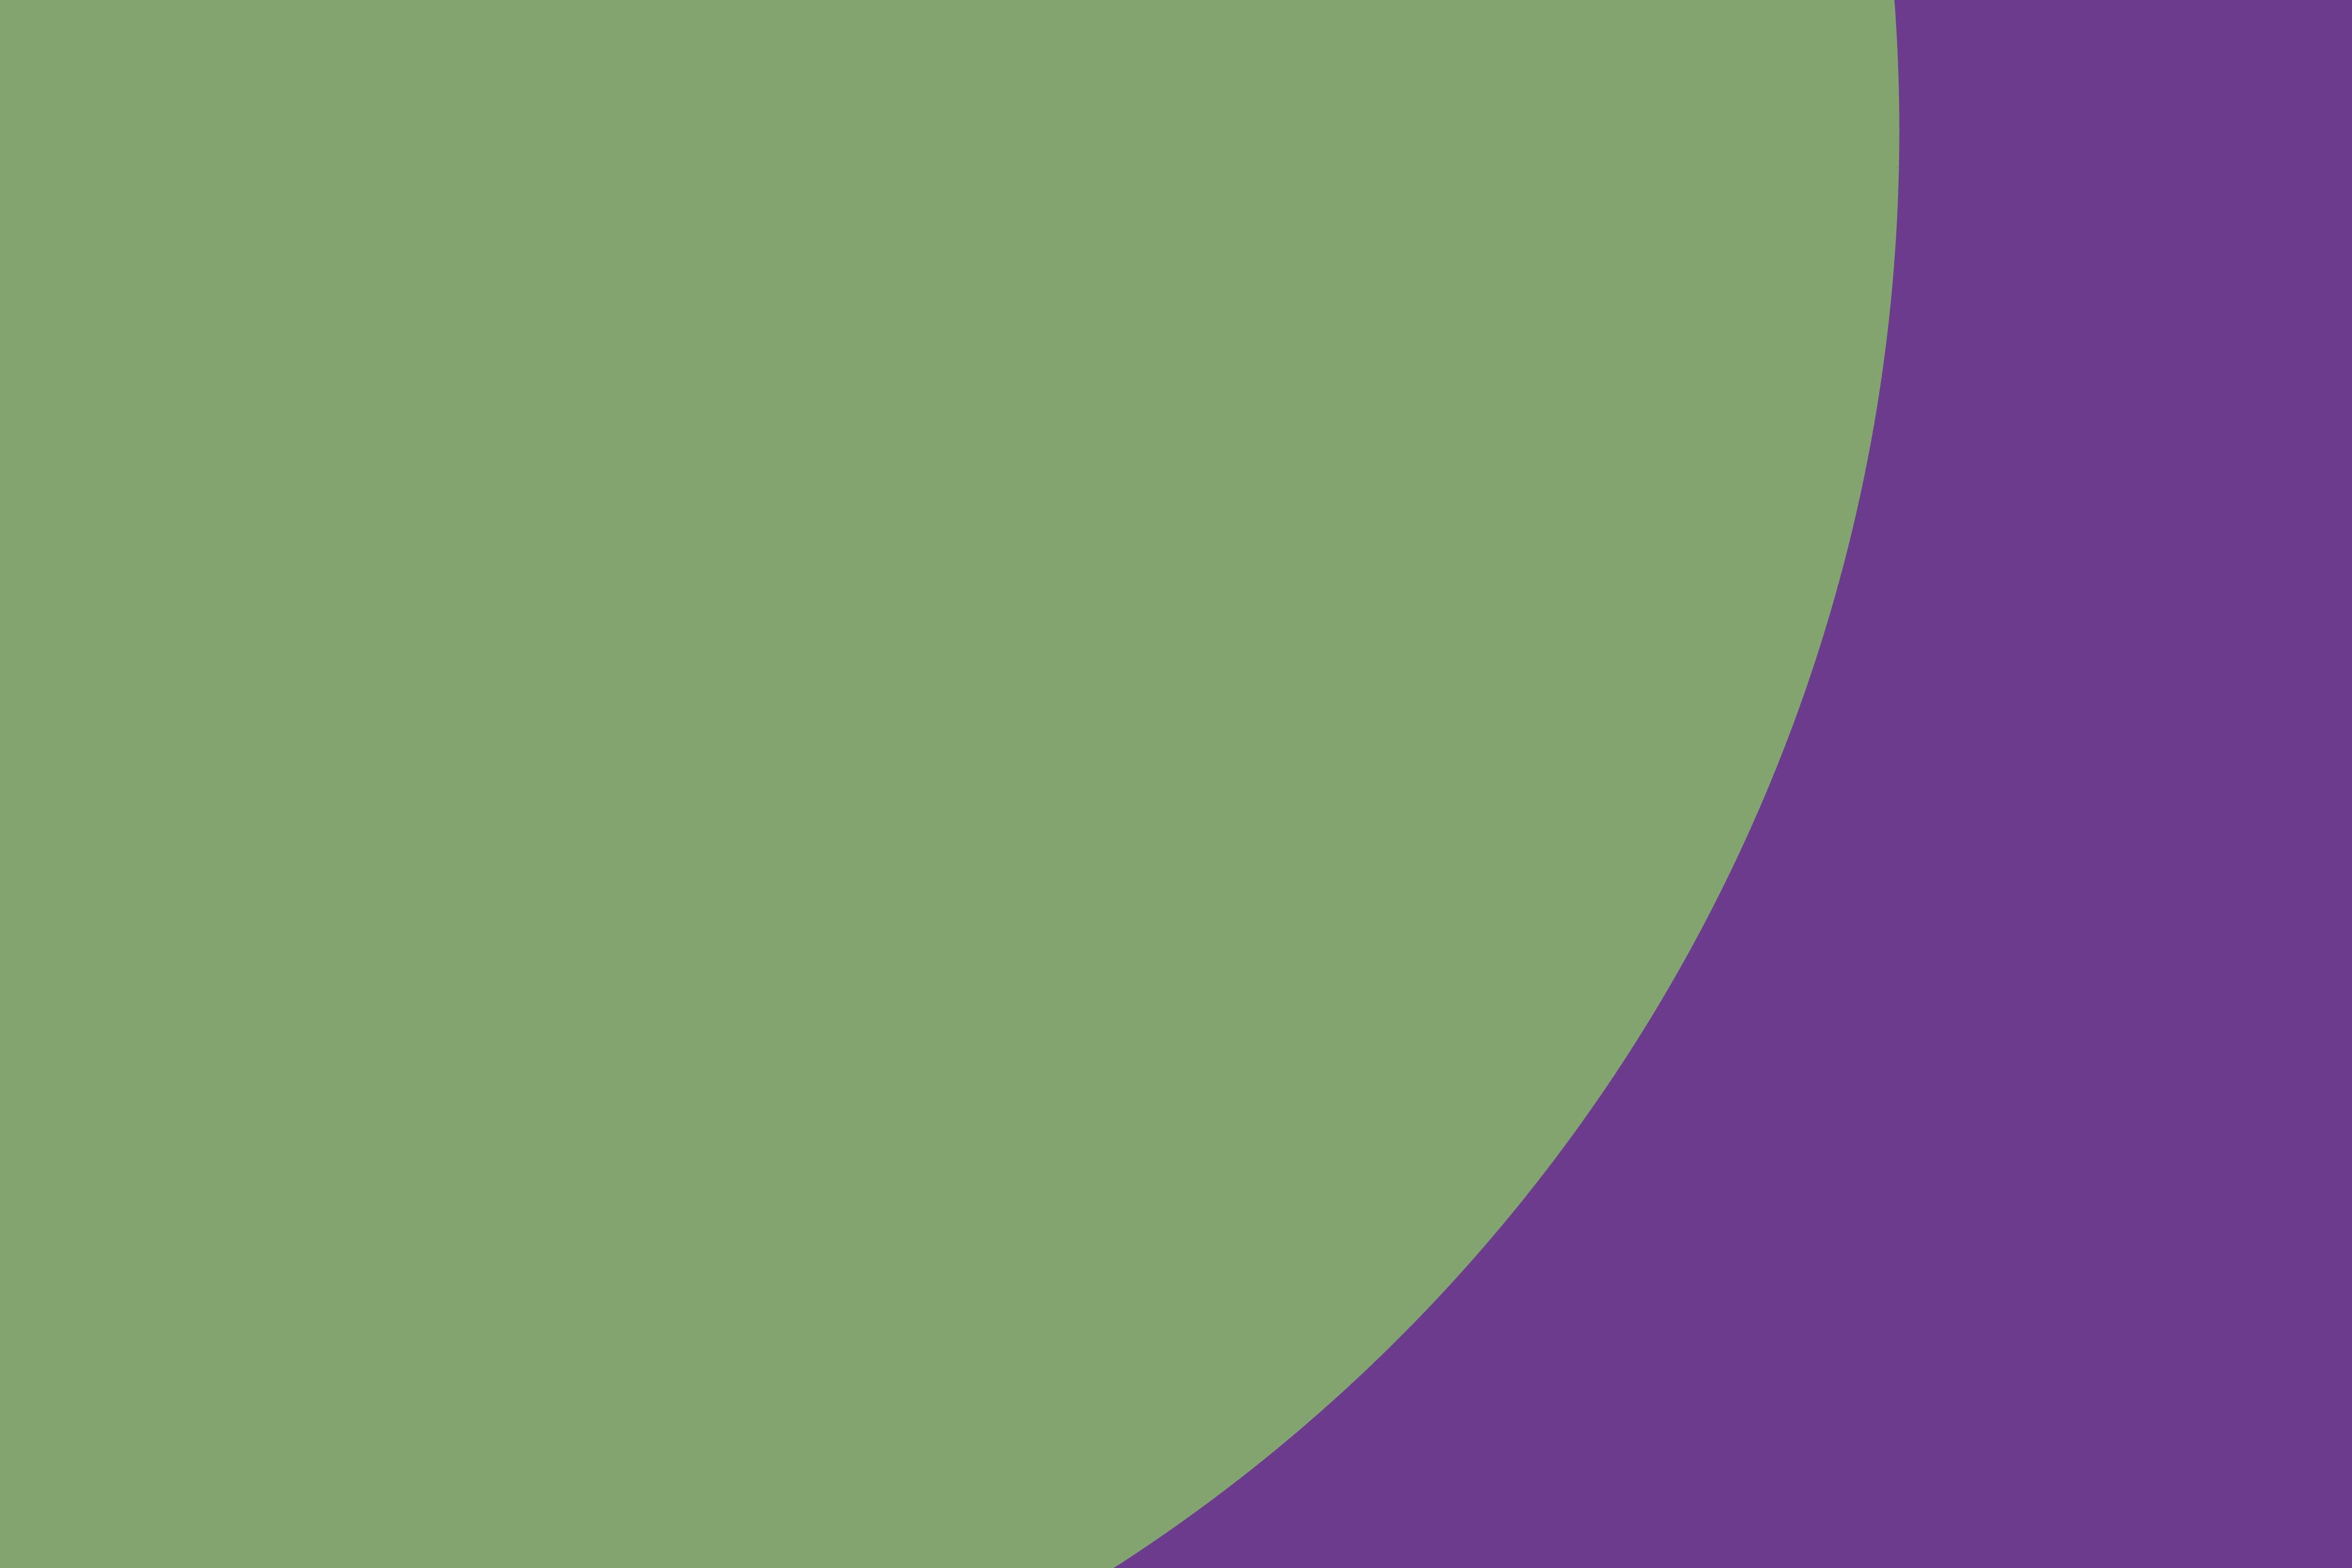 A partial green circle is shown with a close crop against a purple background.